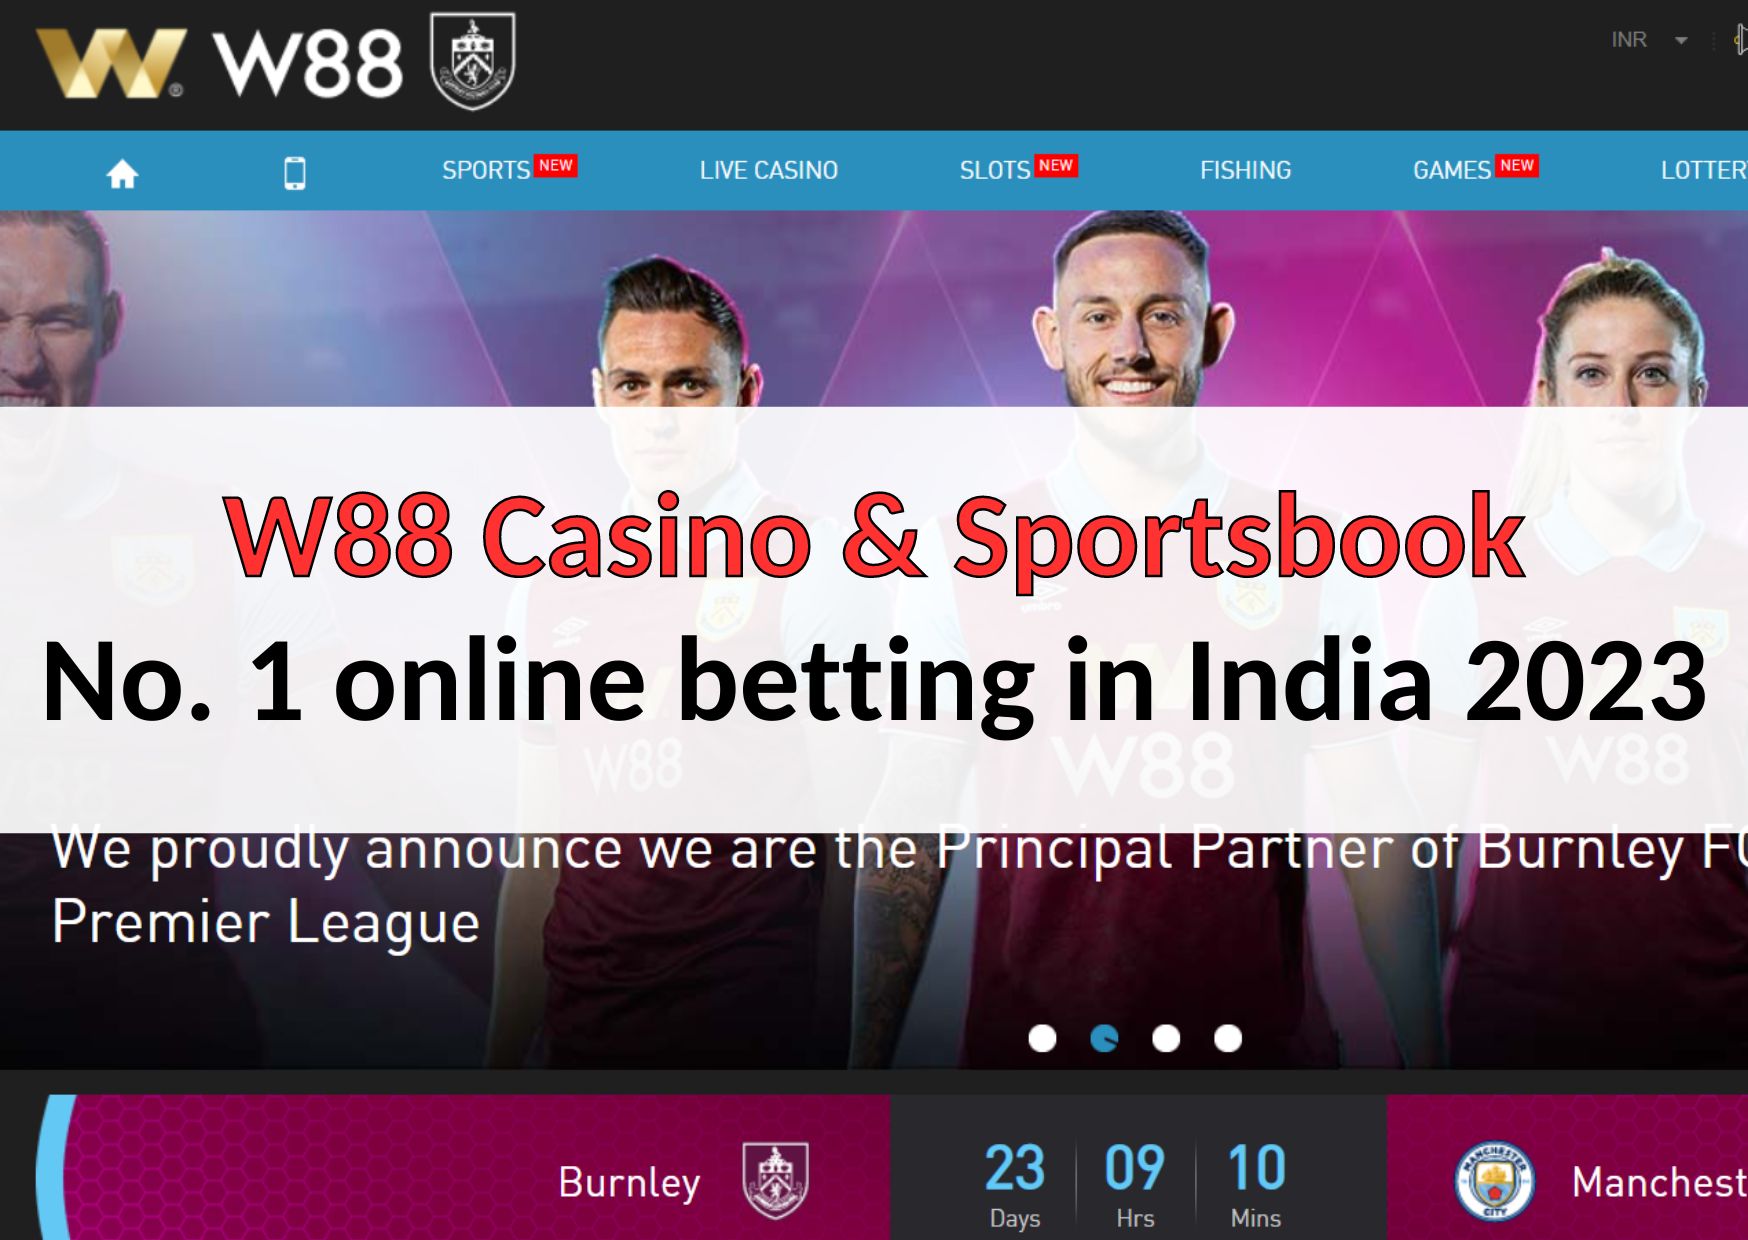 W88 India Review 2023- Advantages and disadvantages of W88 betting number 1  : u/W88indi12